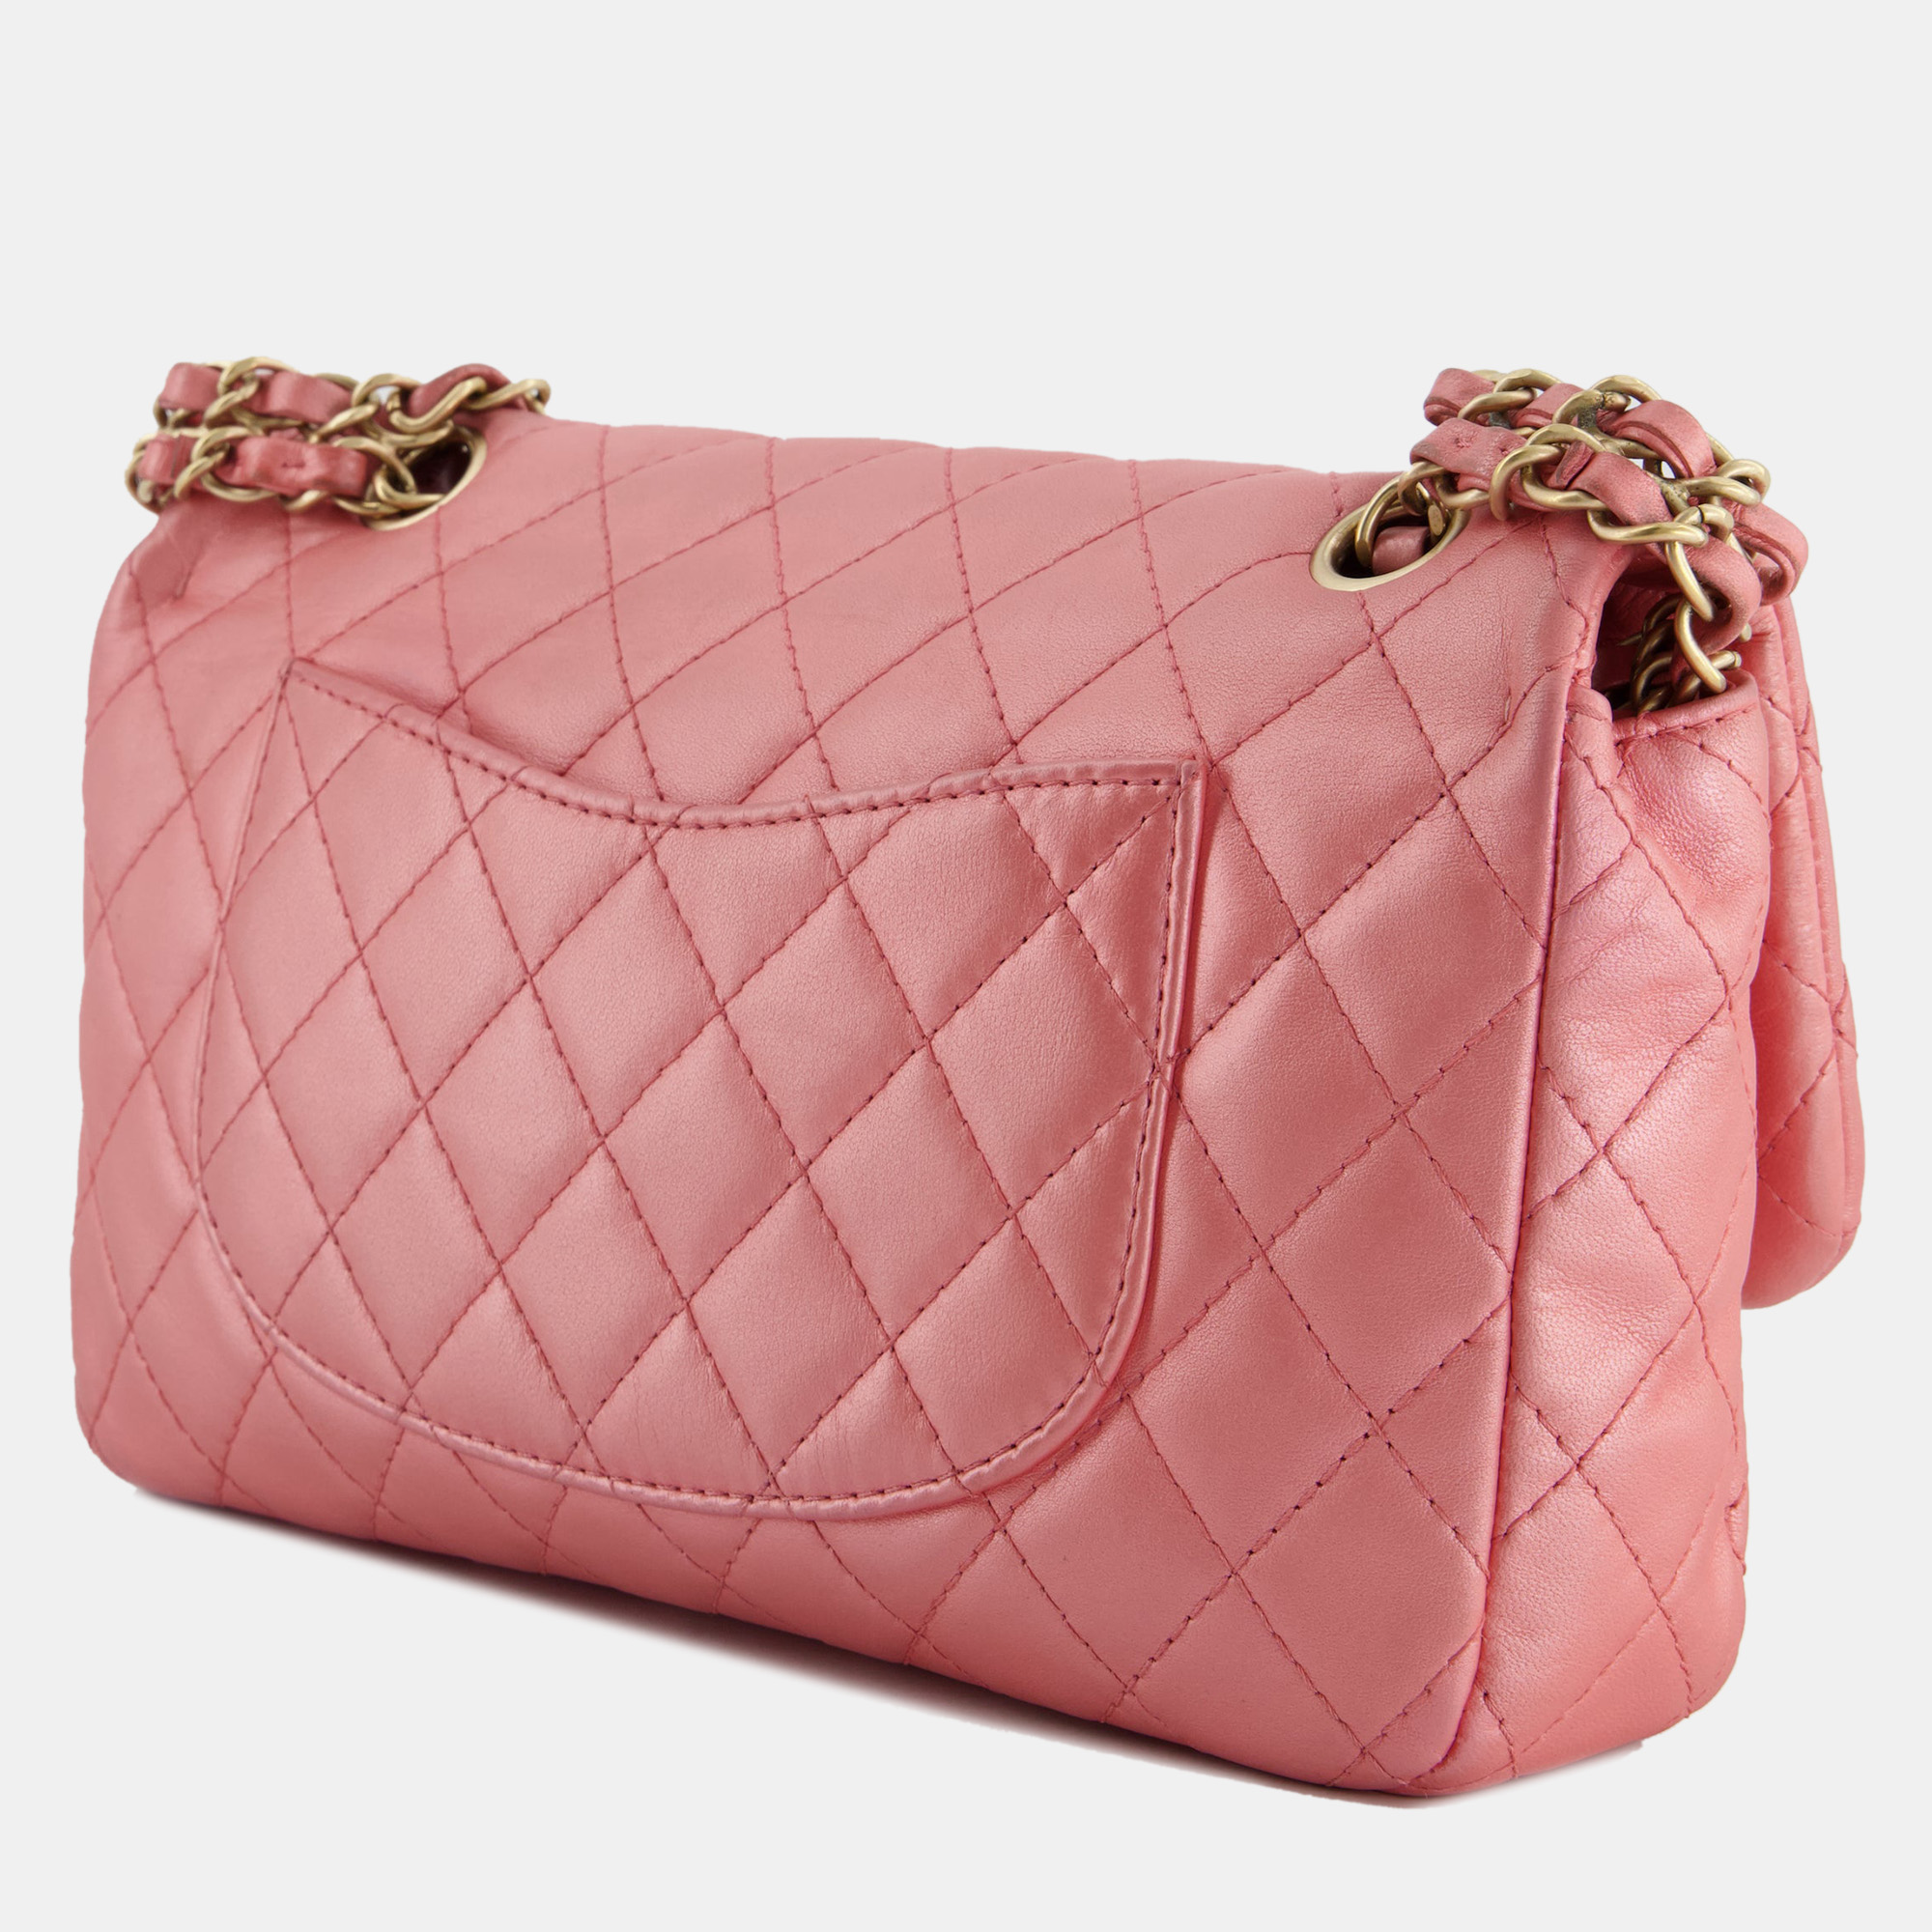 Chanel Pink Metallic Single Flap Shoulder Bag In Lambskin Leather With Gold And Precious Stone Hardware